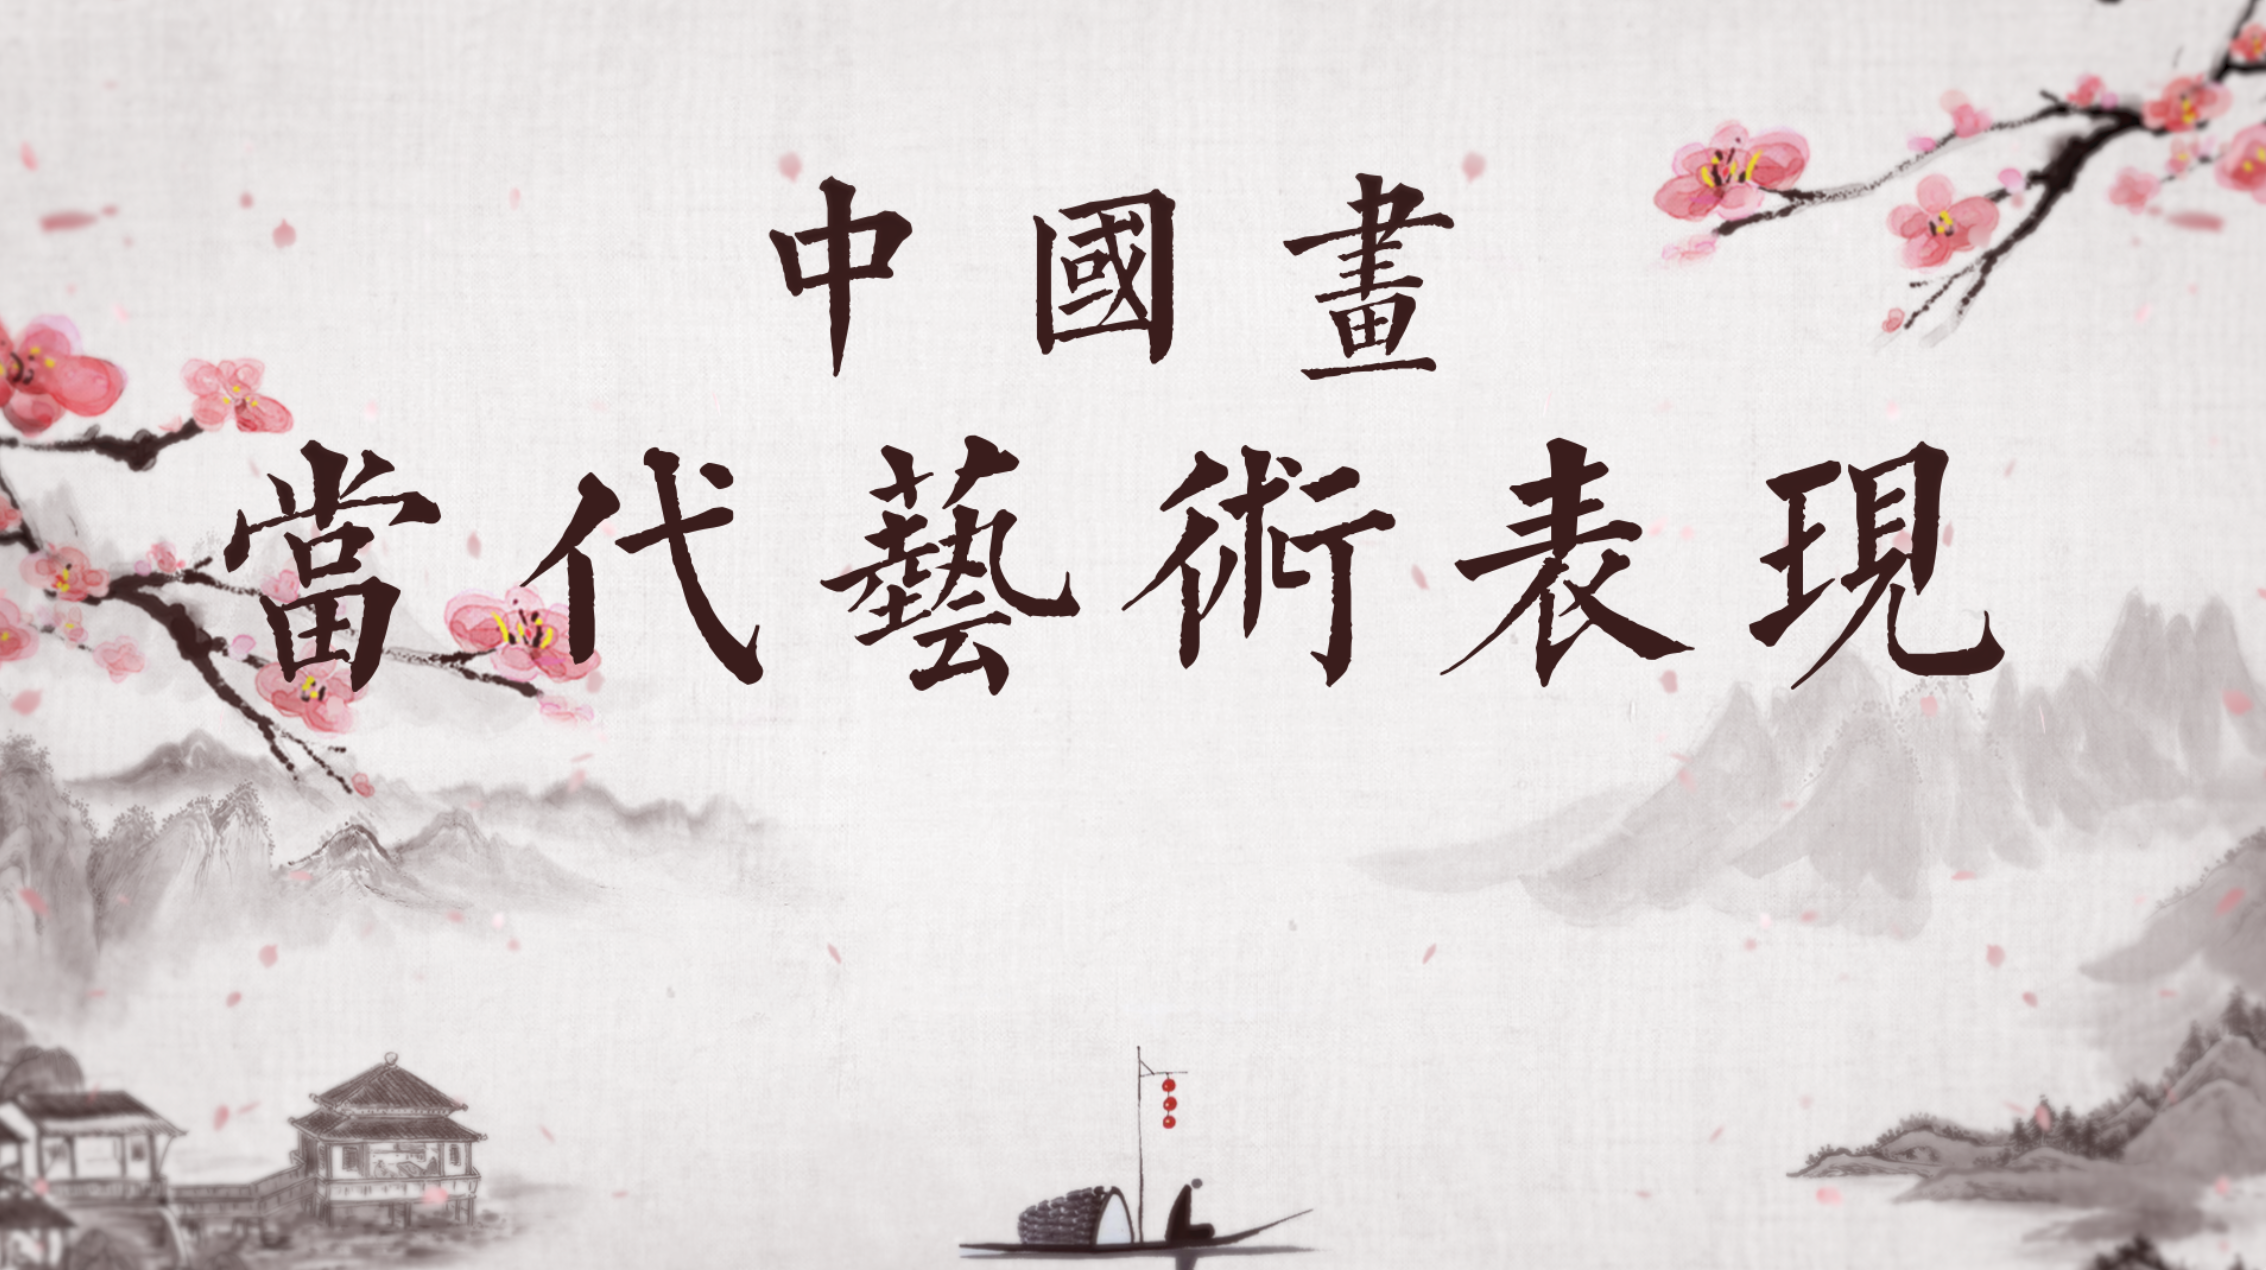 Contemporary artistic expression of Chinese painting